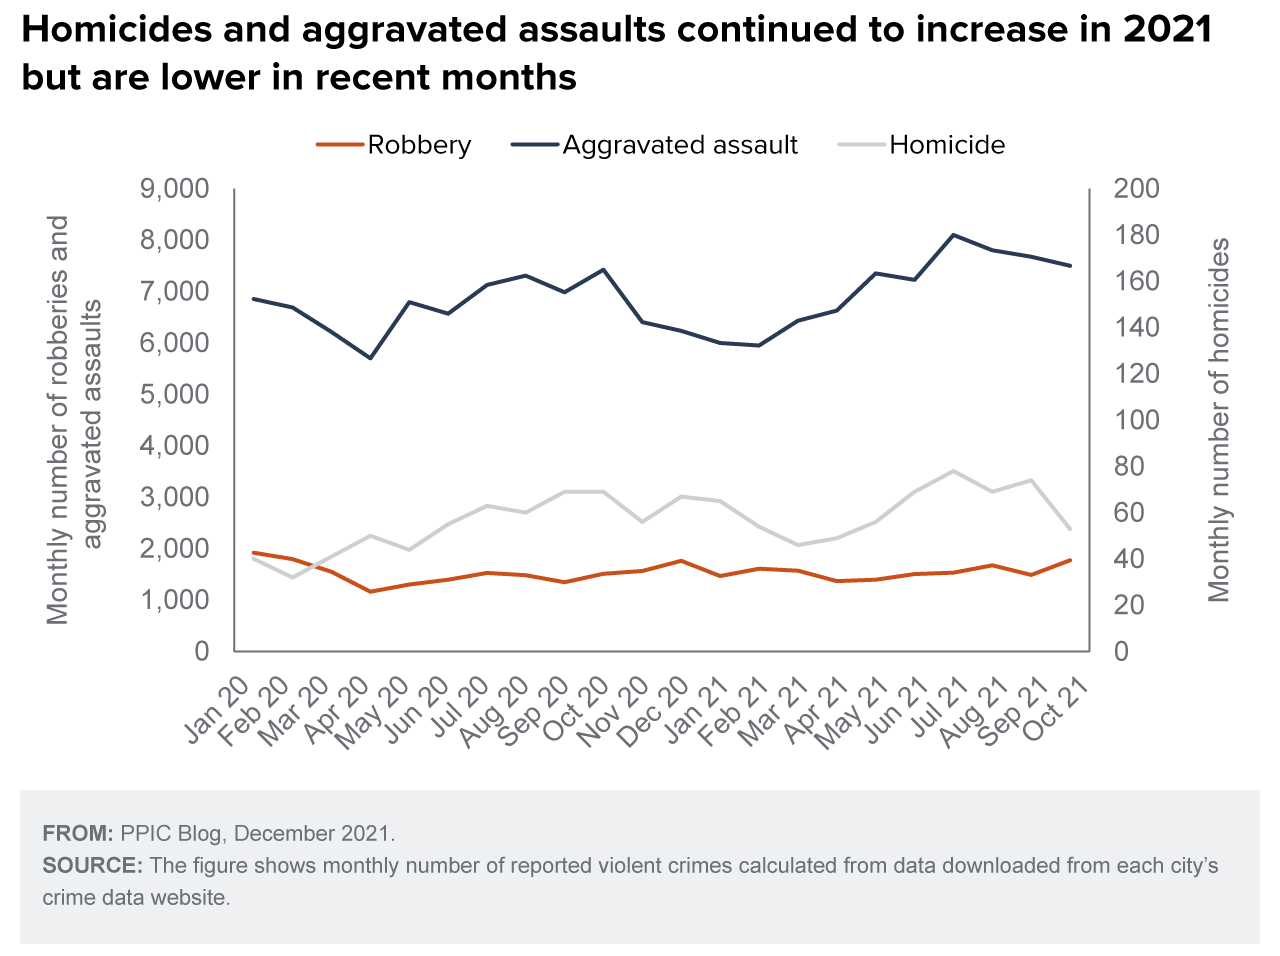 figure - Homicides and aggravated assaults continued to increase in 2021 but are lower in recent months